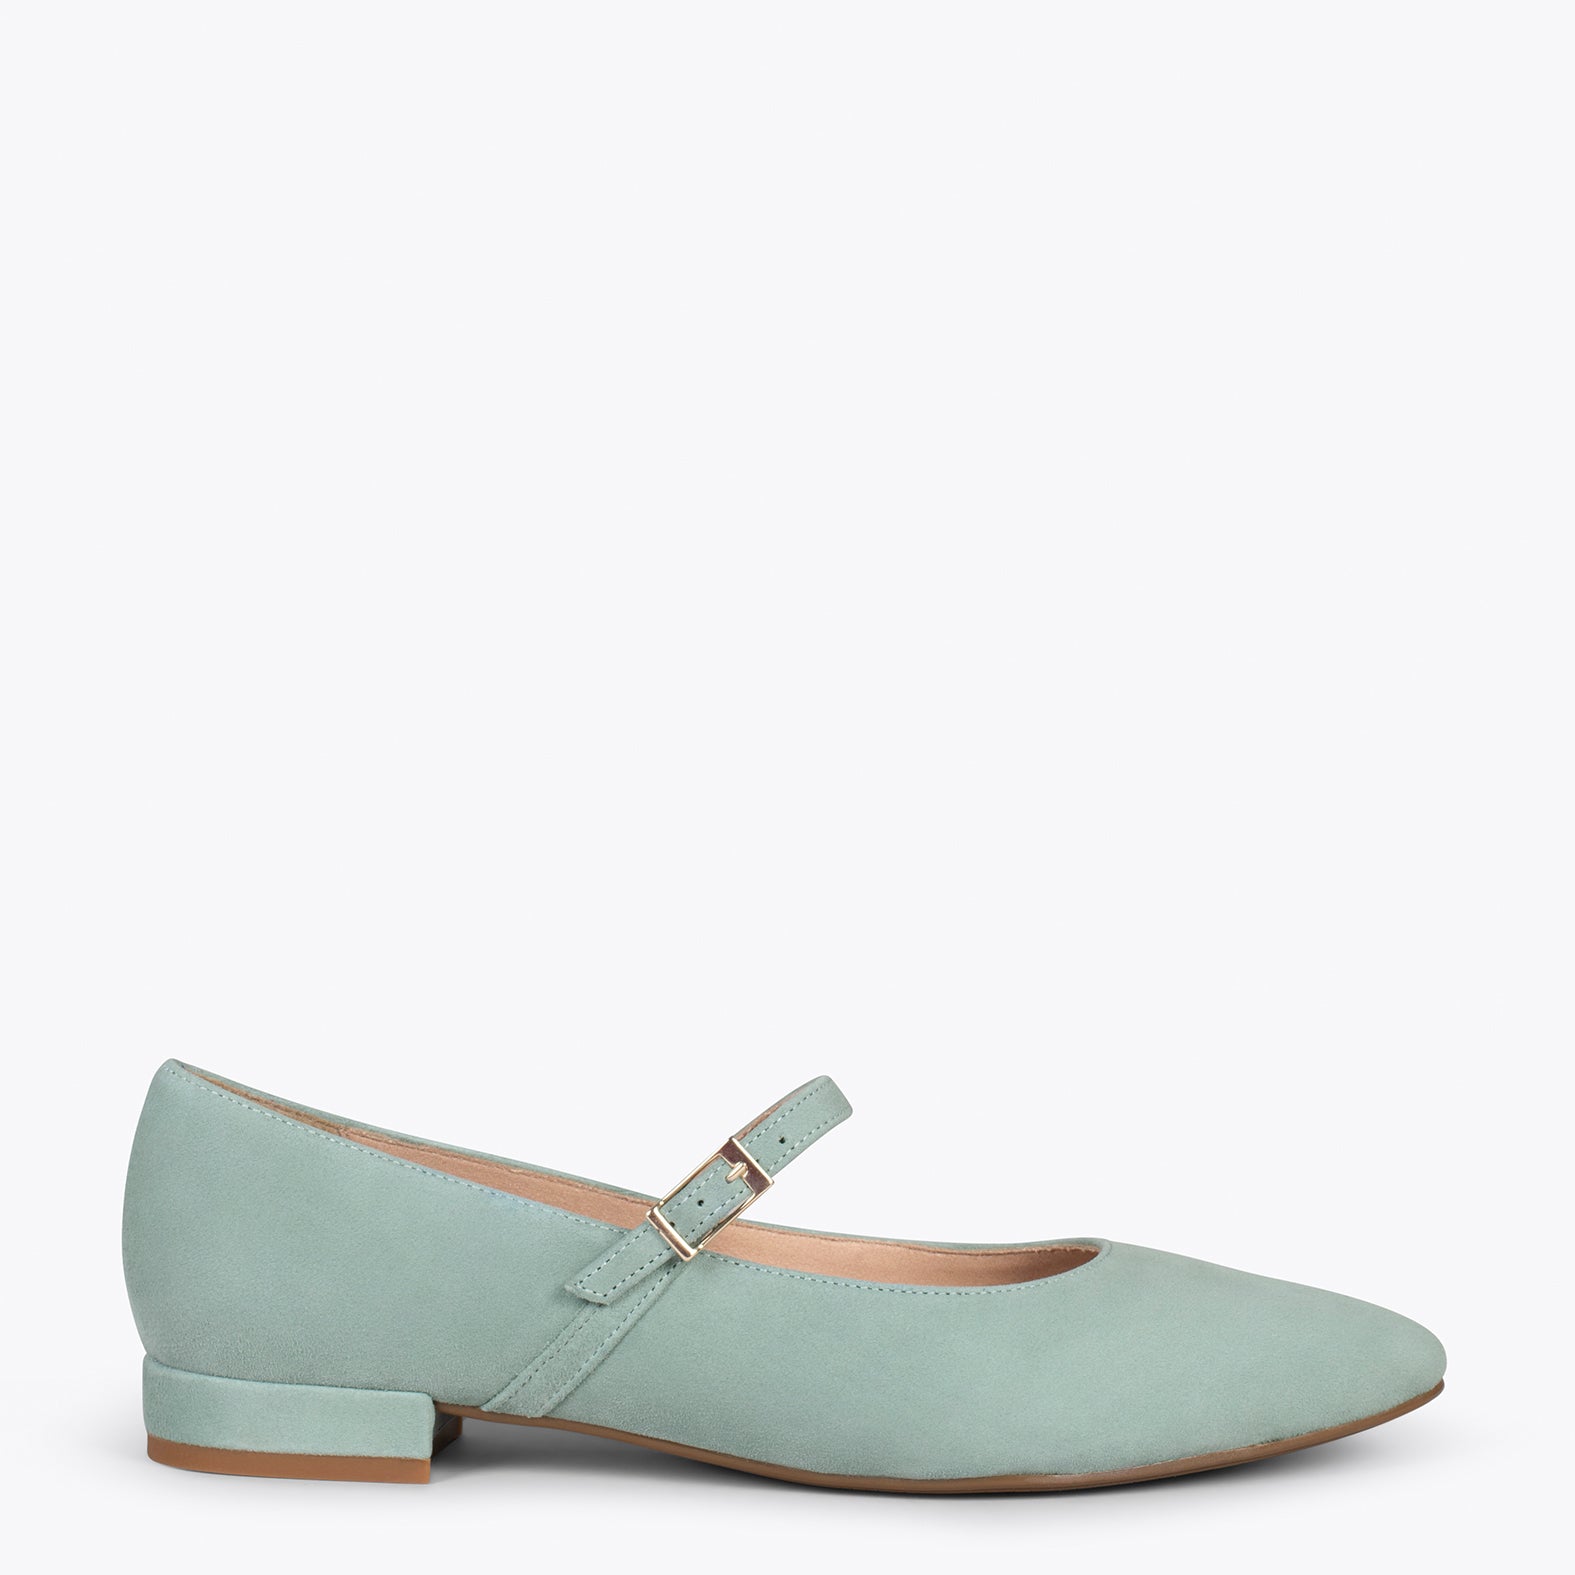 MARY-JANE – SAGE buckled leather flats